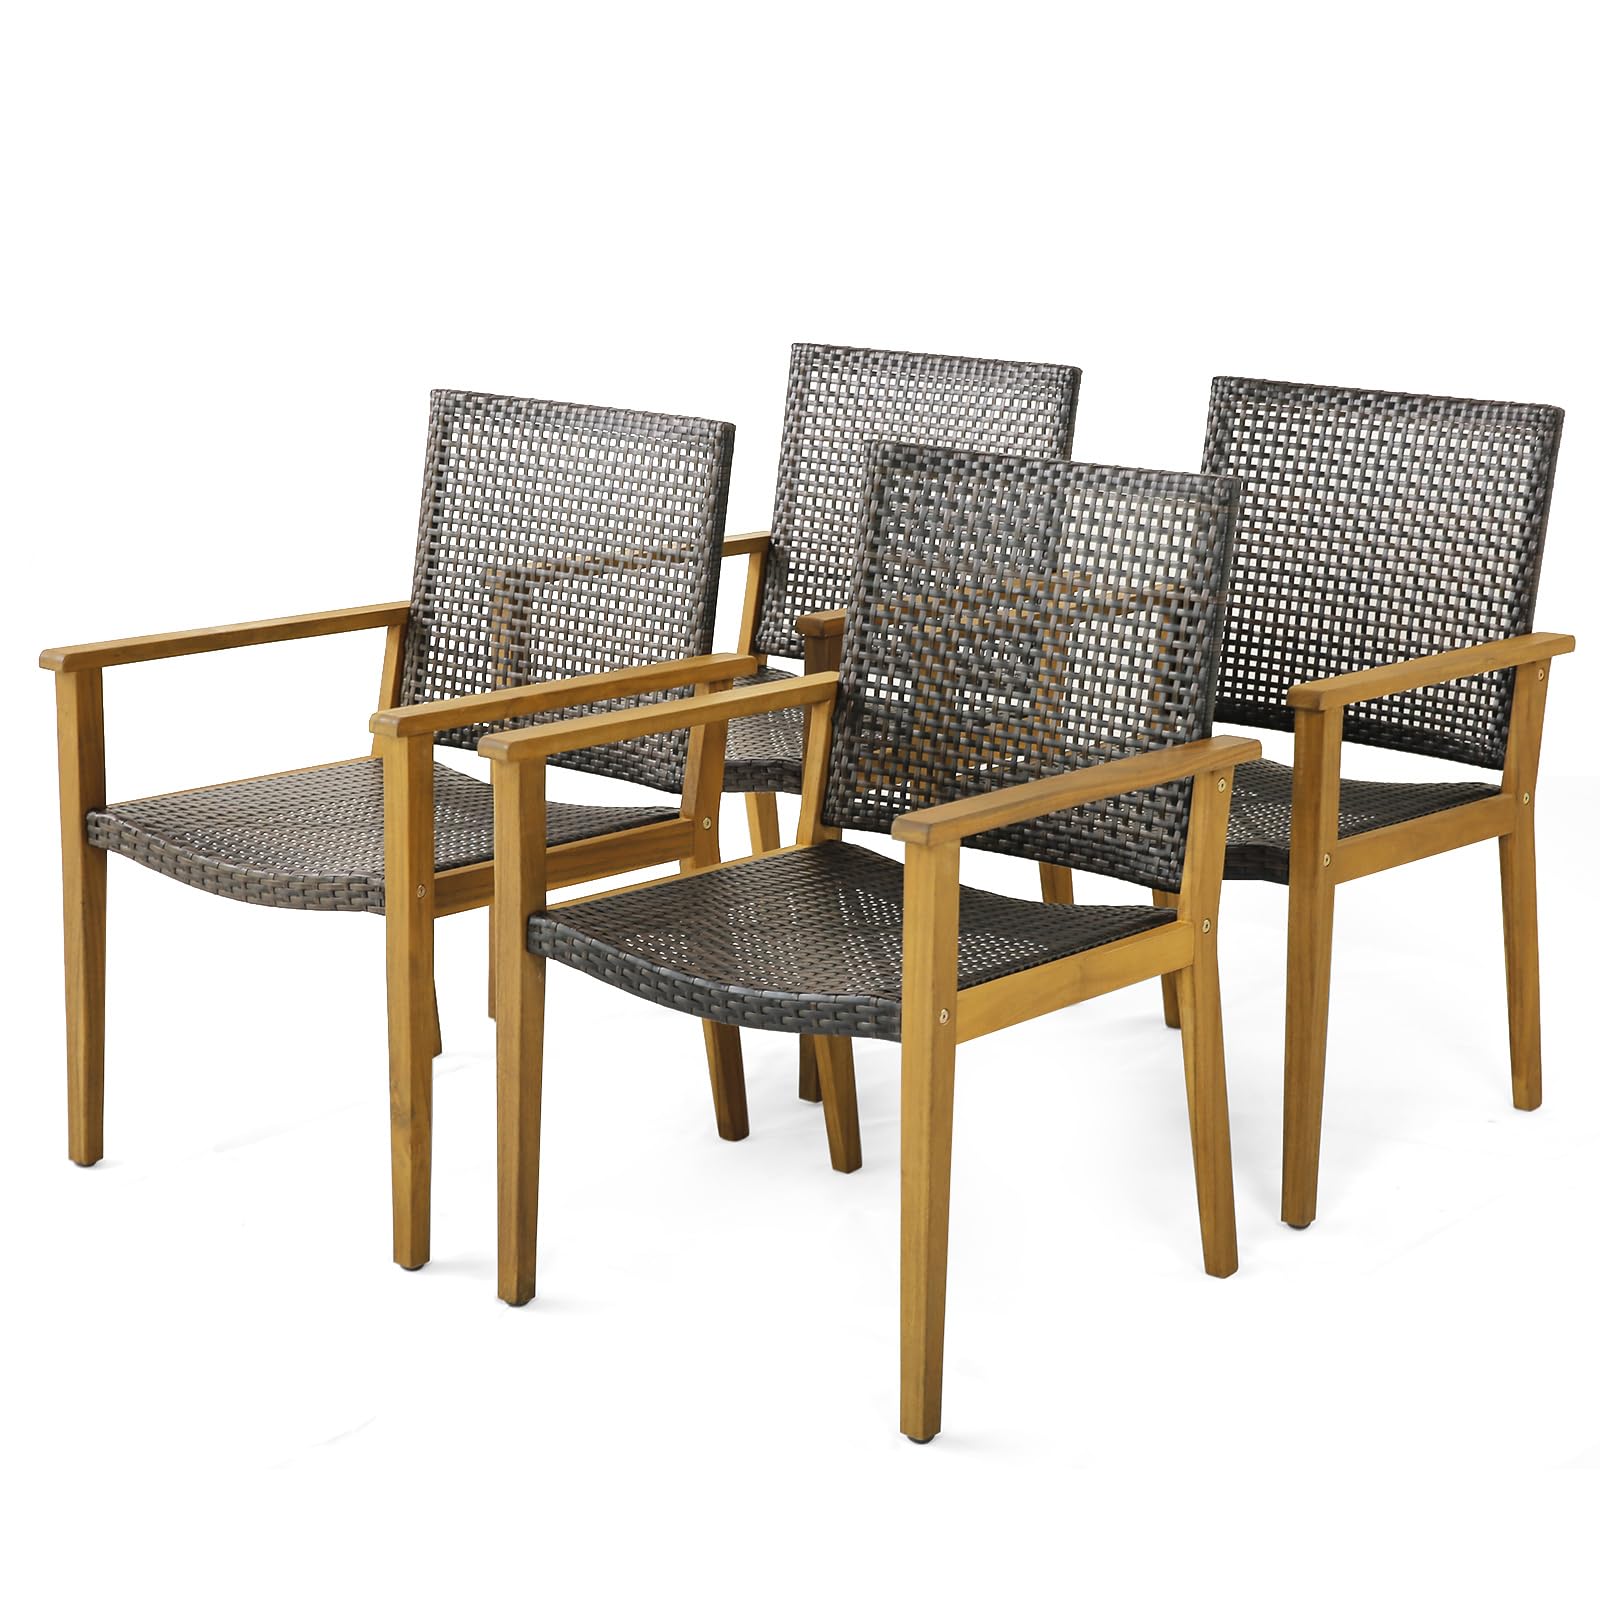 Patio Dining Chairs Set of 4 - Tangkula